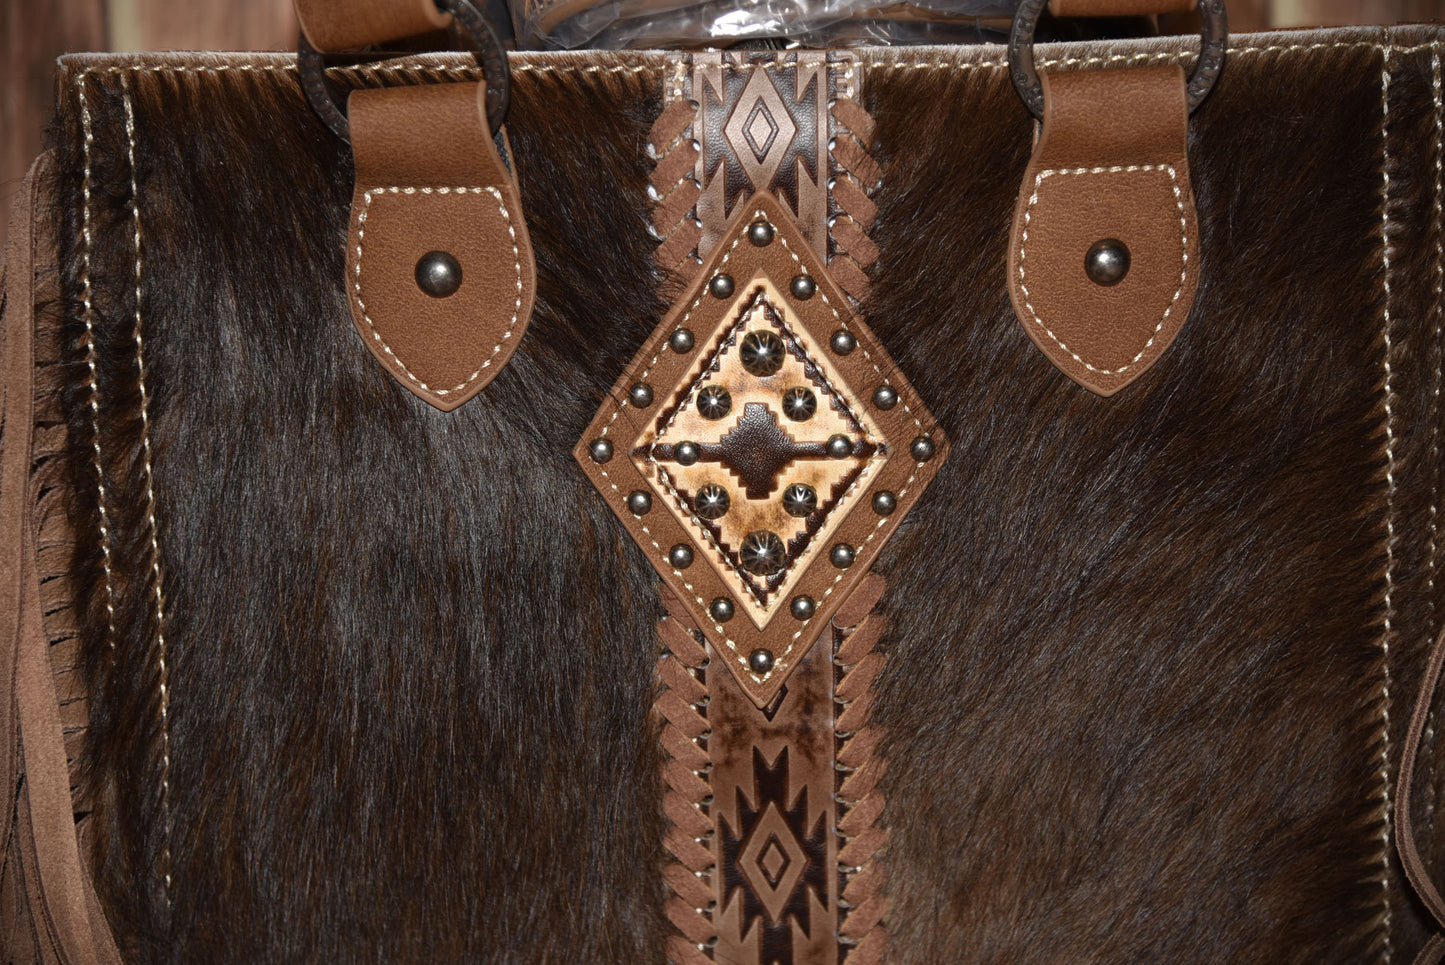 TRINITY RANCH HAIR ON COWHIDE CONCEALED CARRY TOTE/CROSSBODY